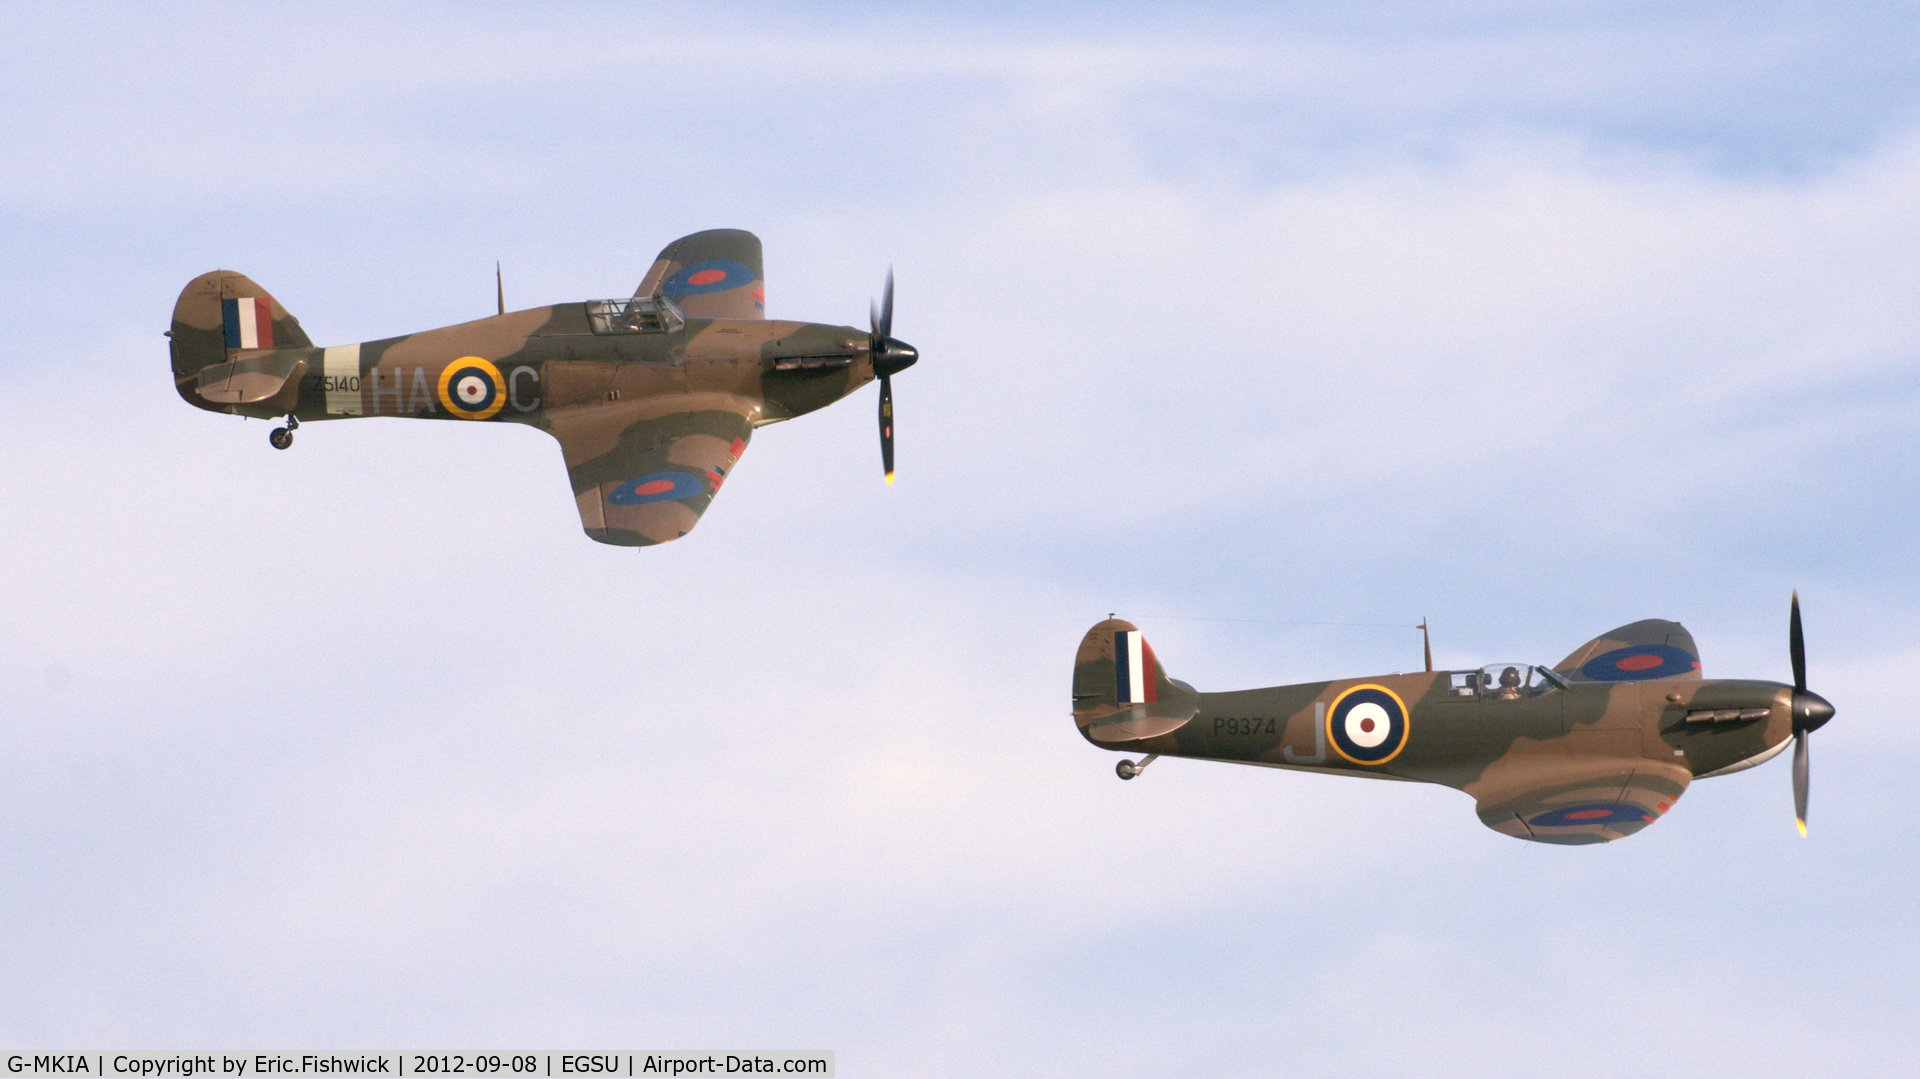 G-MKIA, 1939 Supermarine 300 Spitfire Mk1A C/N 6S/30565, 45. P9374 with Z5140 at The Duxford Air Show, Sept. 2012